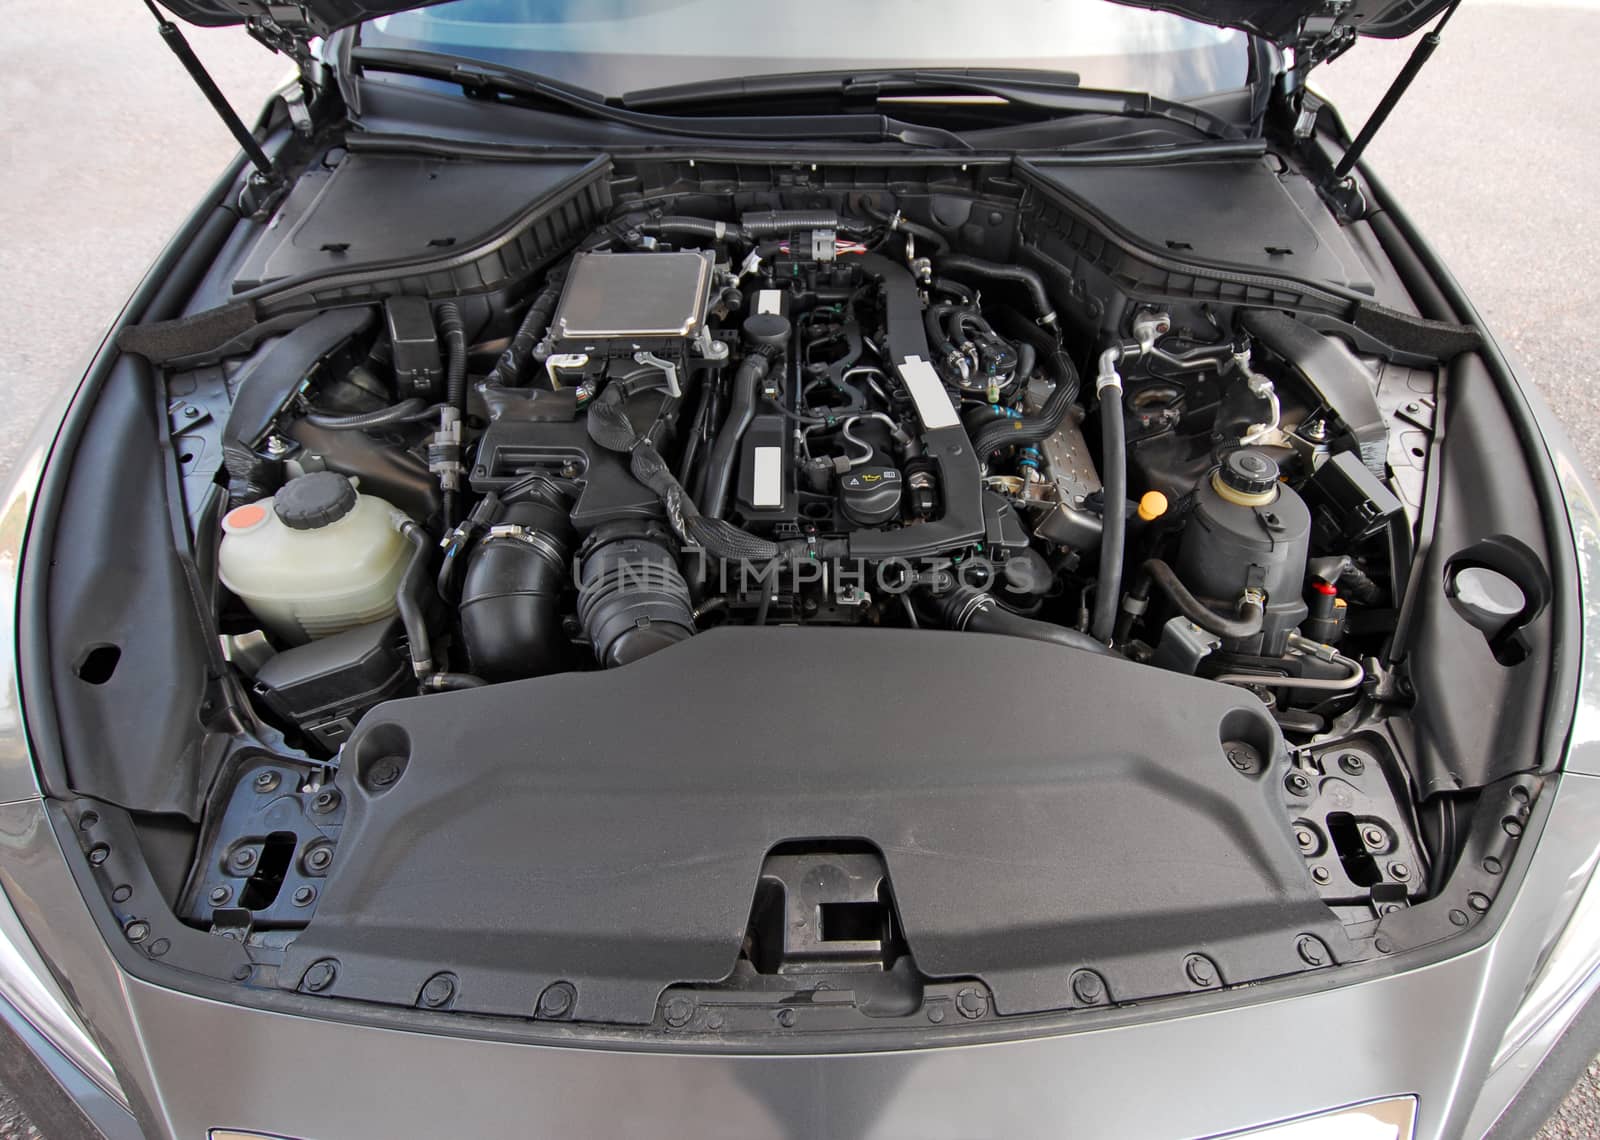 a diesel engine in a large luxury passenger car